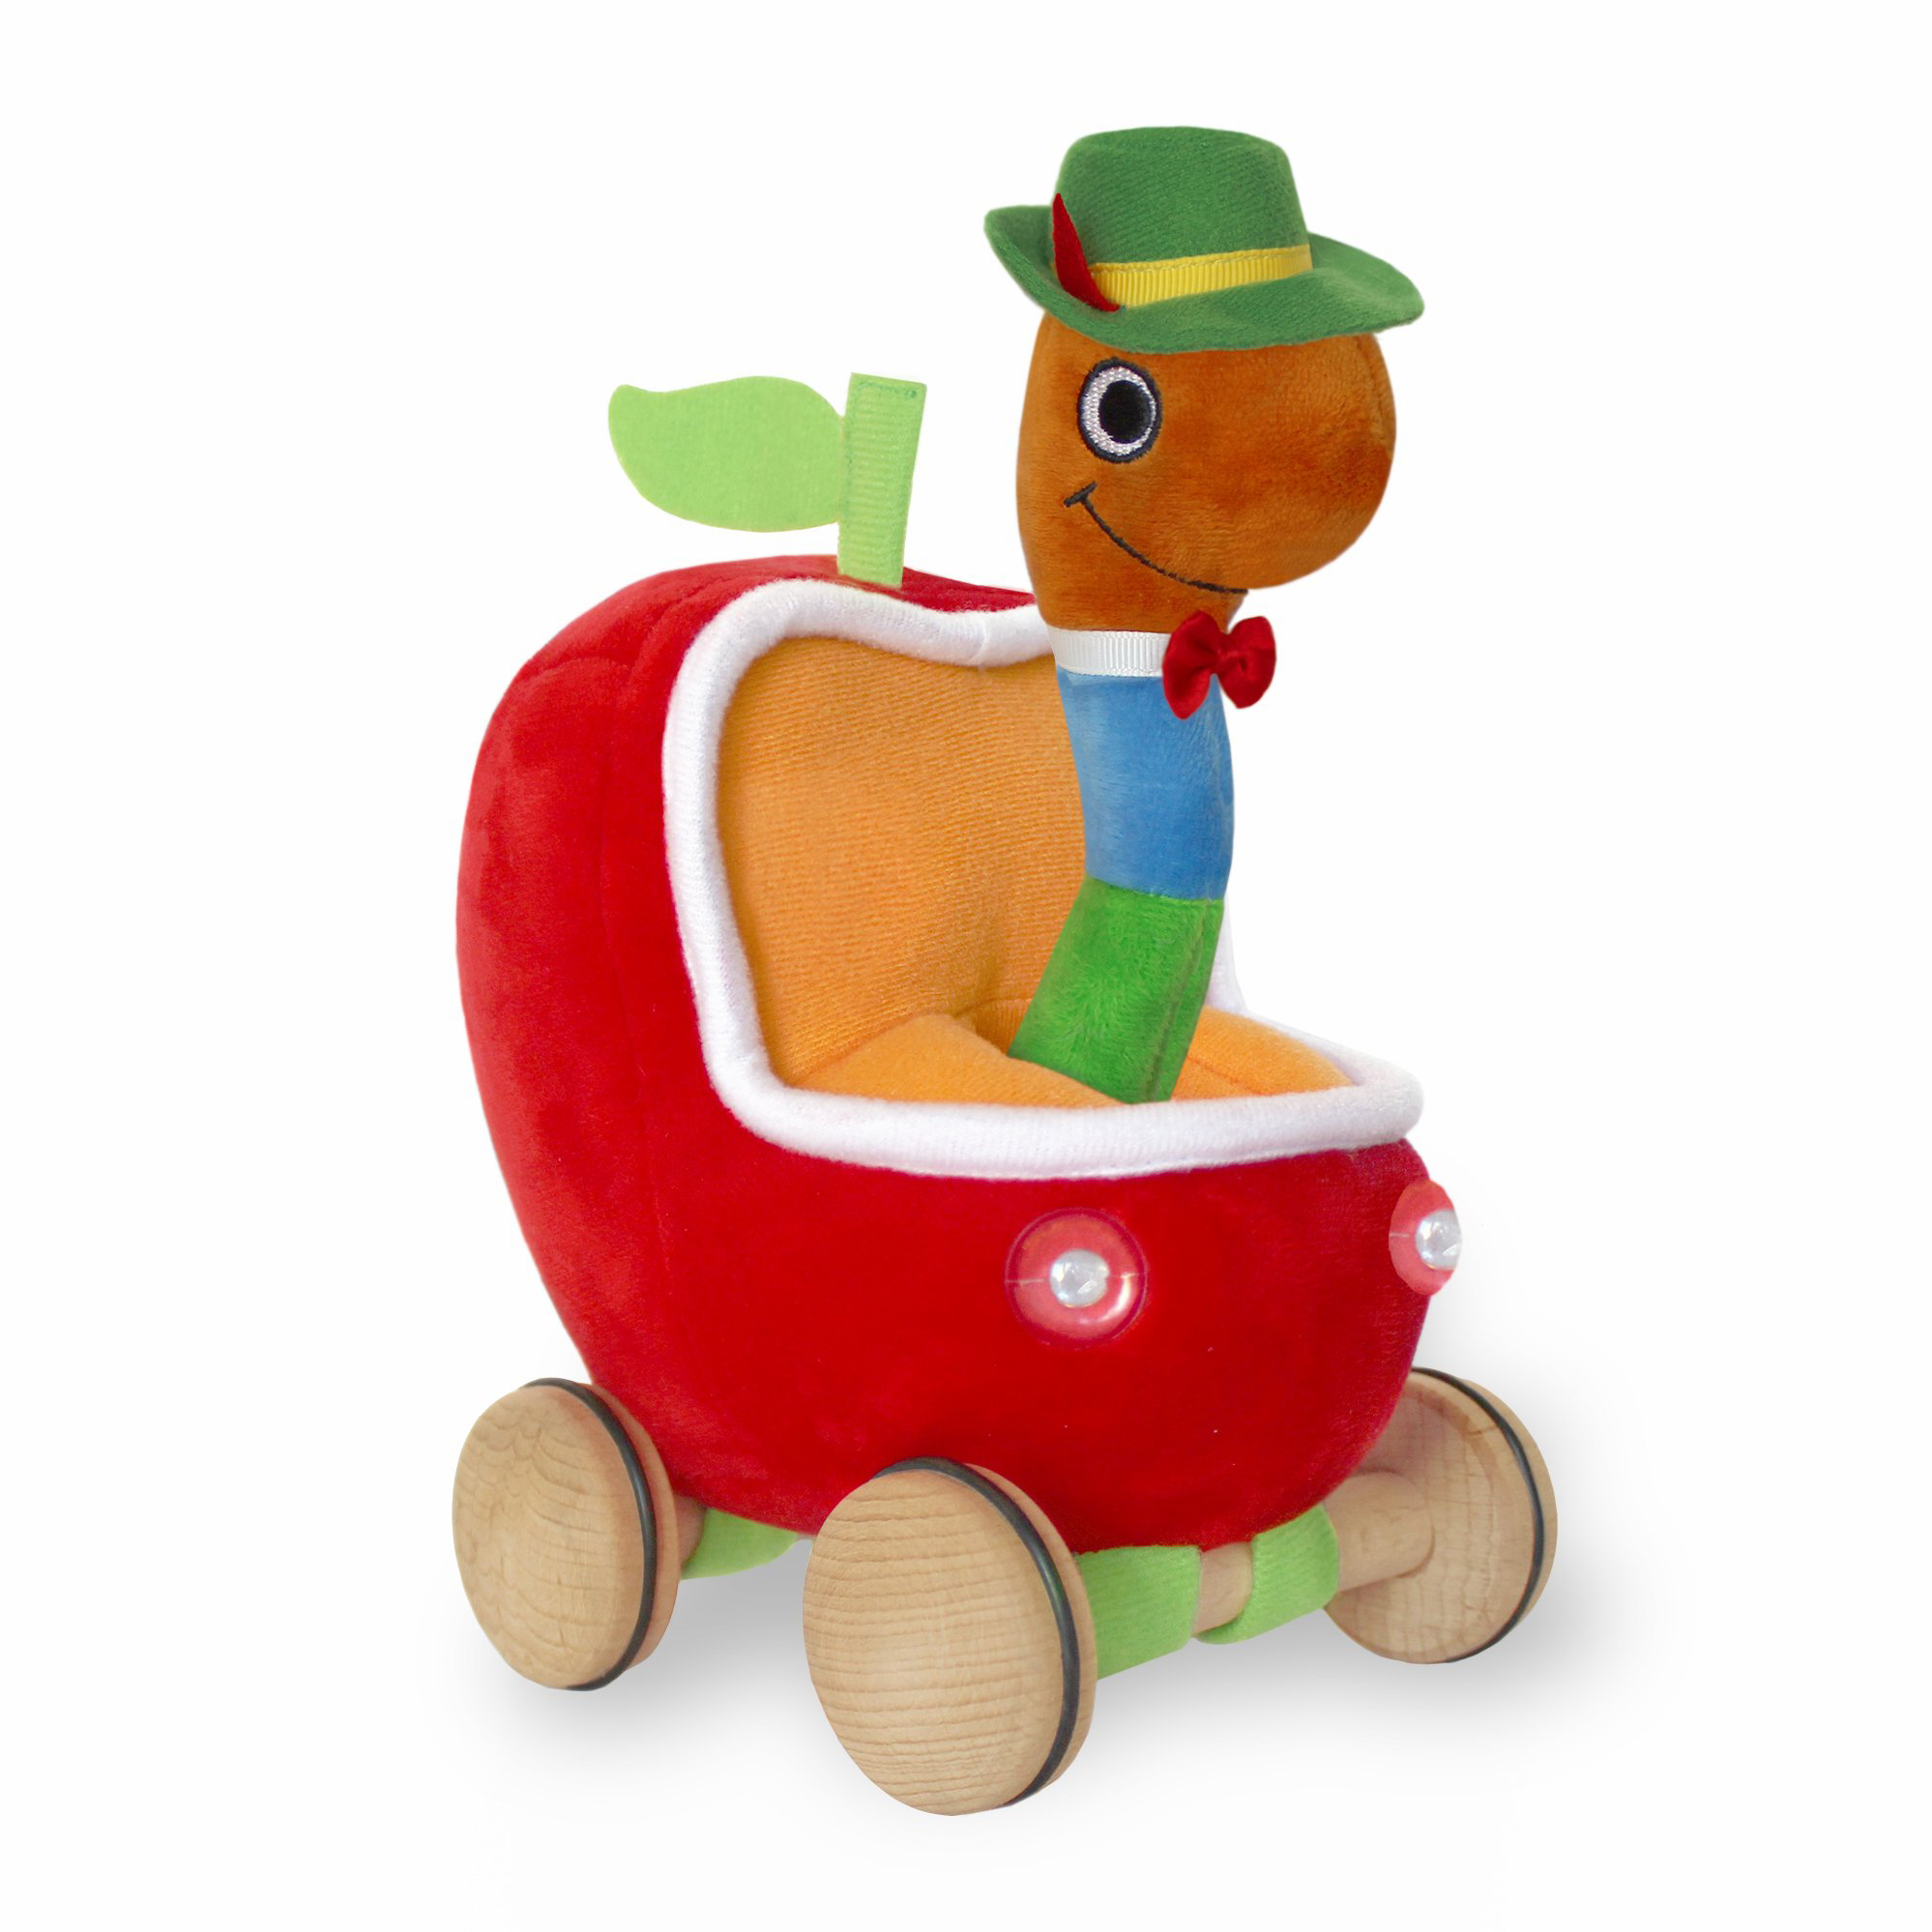 Lowly Worm soft toy and Apple car 1